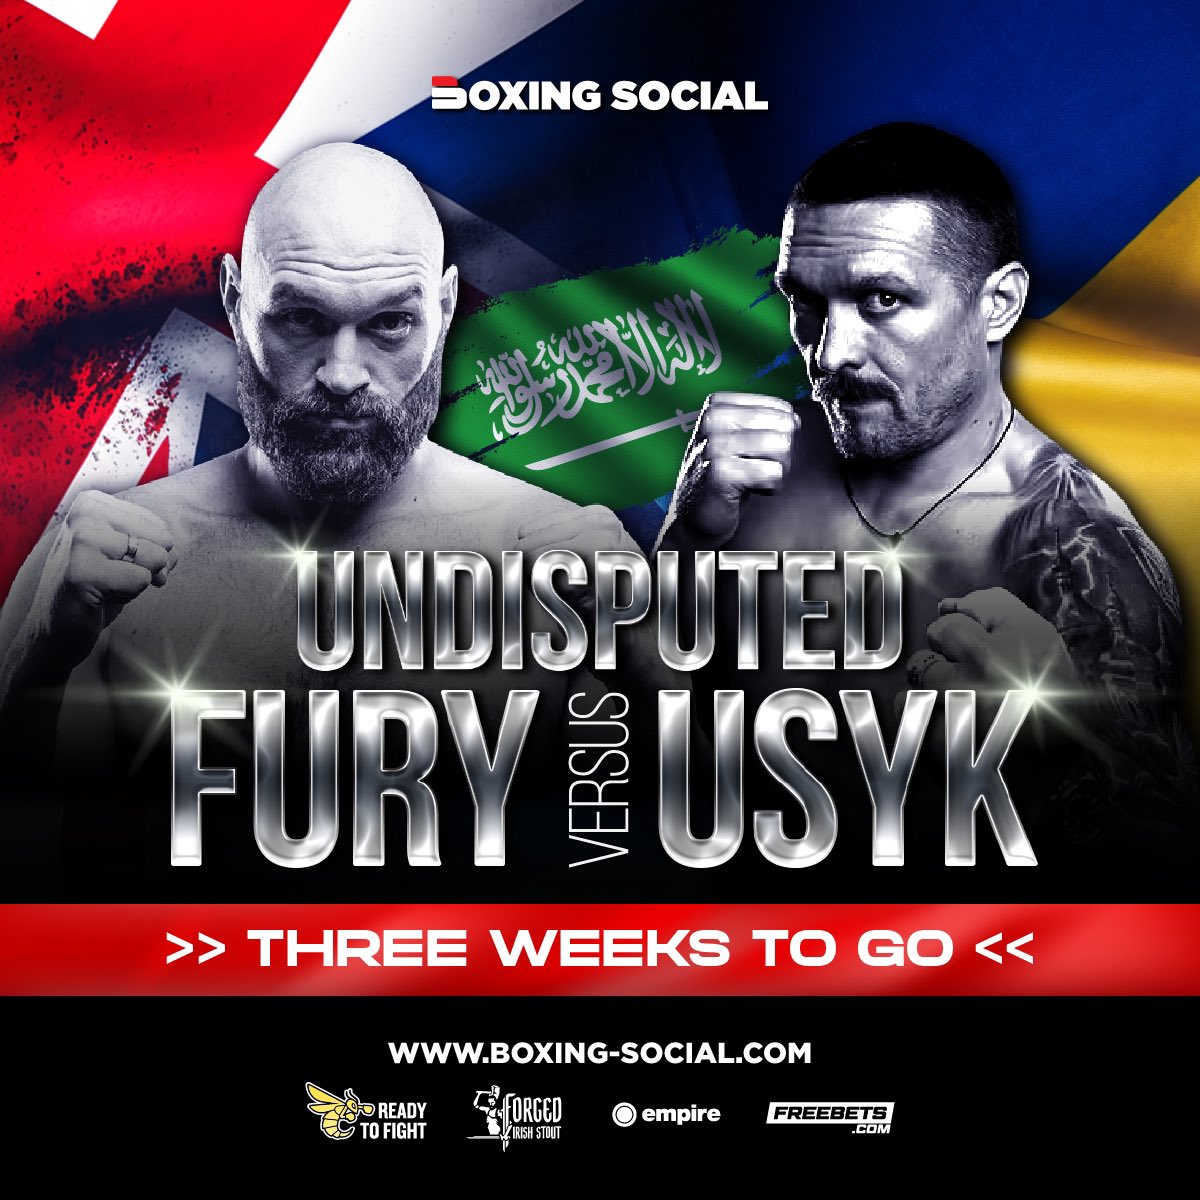 𝐓𝐇𝐑𝐄𝐄 𝐖𝐄𝐄𝐊𝐒 𝐓𝐎 𝐆𝐎 ⏳ Just 3 weeks to go until Tyson Fury and Oleksandr Usyk battle it out for the undisputed heavyweight world titles!🇸🇦 Who wins?👇 #FuryUsyk #Boxing